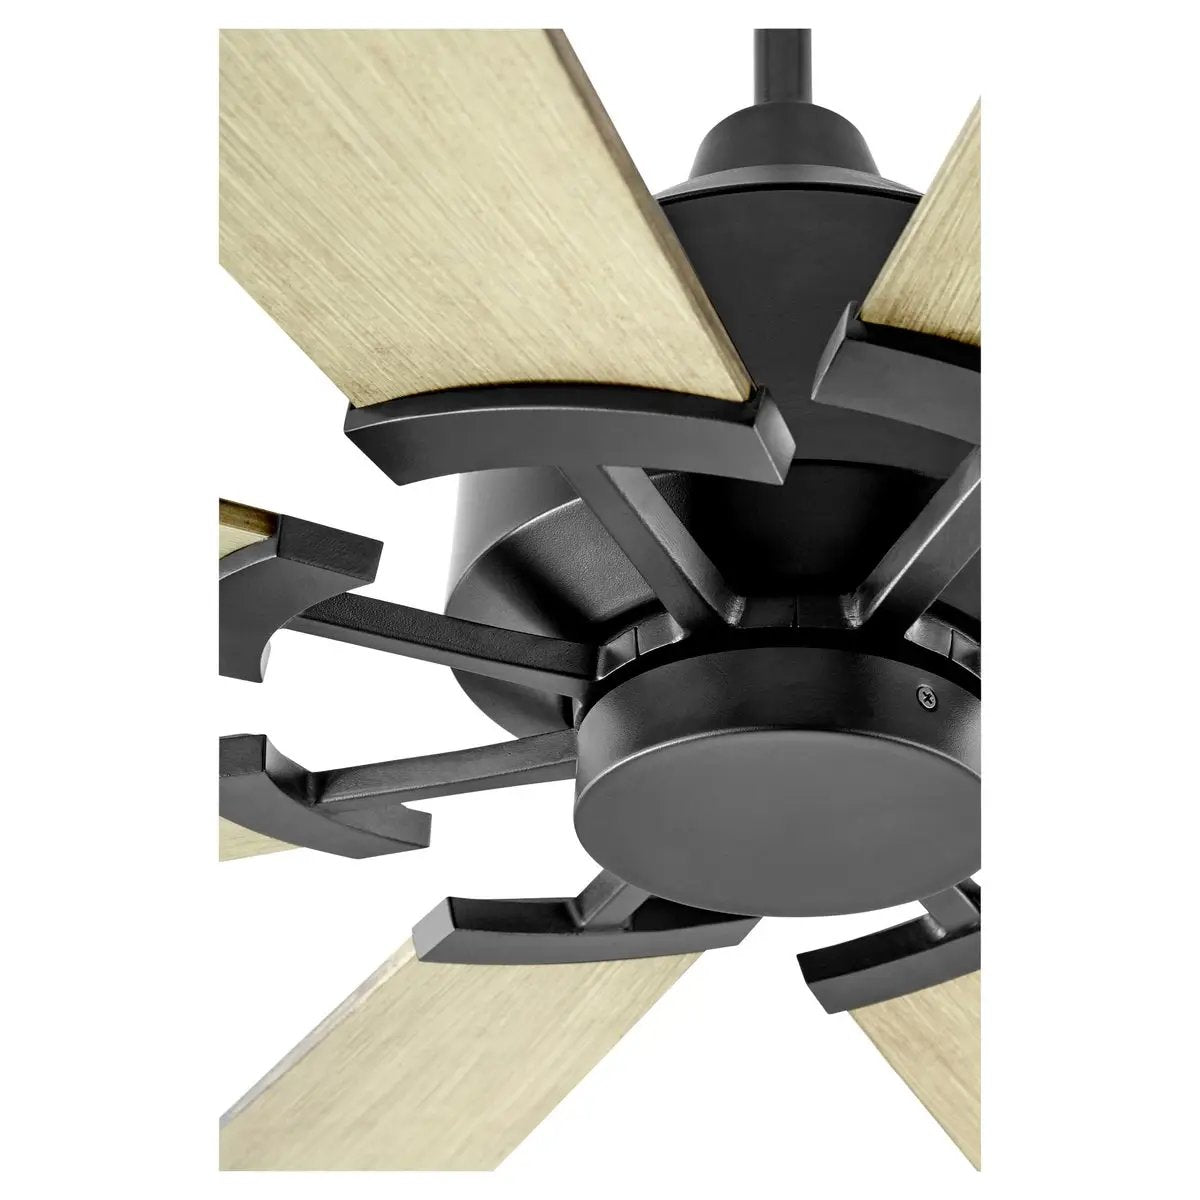 A close-up of the Quorum International Modern Ceiling Fan, showcasing its 8-blade design and sleek finish. Perfect for mid-sized and larger spaces, this fan can transform your living room or bedroom with its modern farmhouse aesthetic or eclectic traditional design. Elevate your space with this functional and stylish ceiling fan.